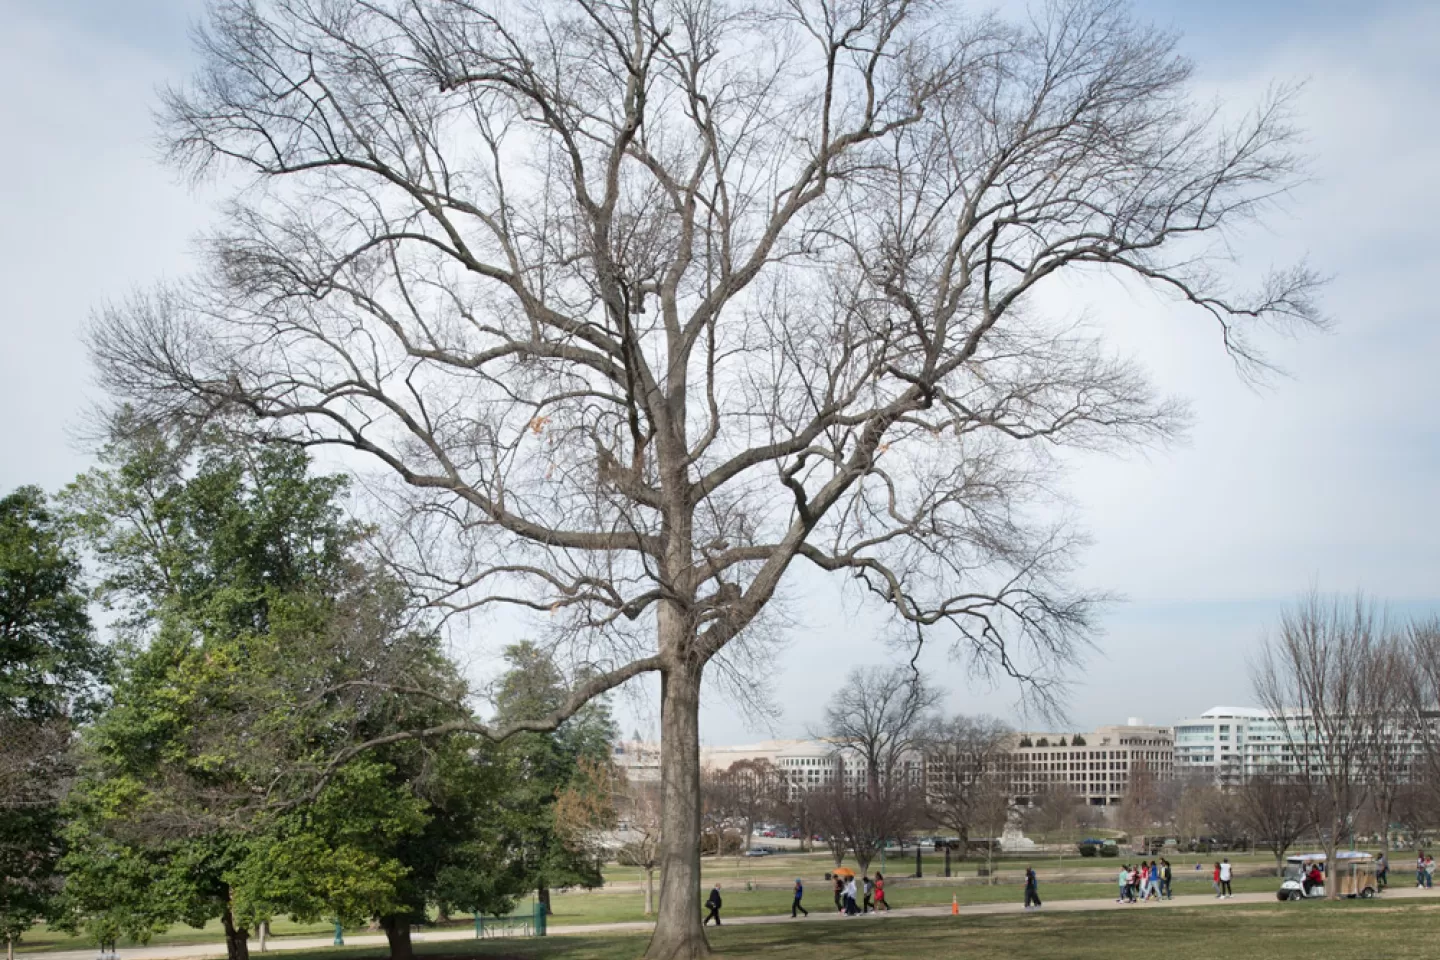 The Rep. Marlin Olmsted tree on the U.S. Capitol Grounds during winter.